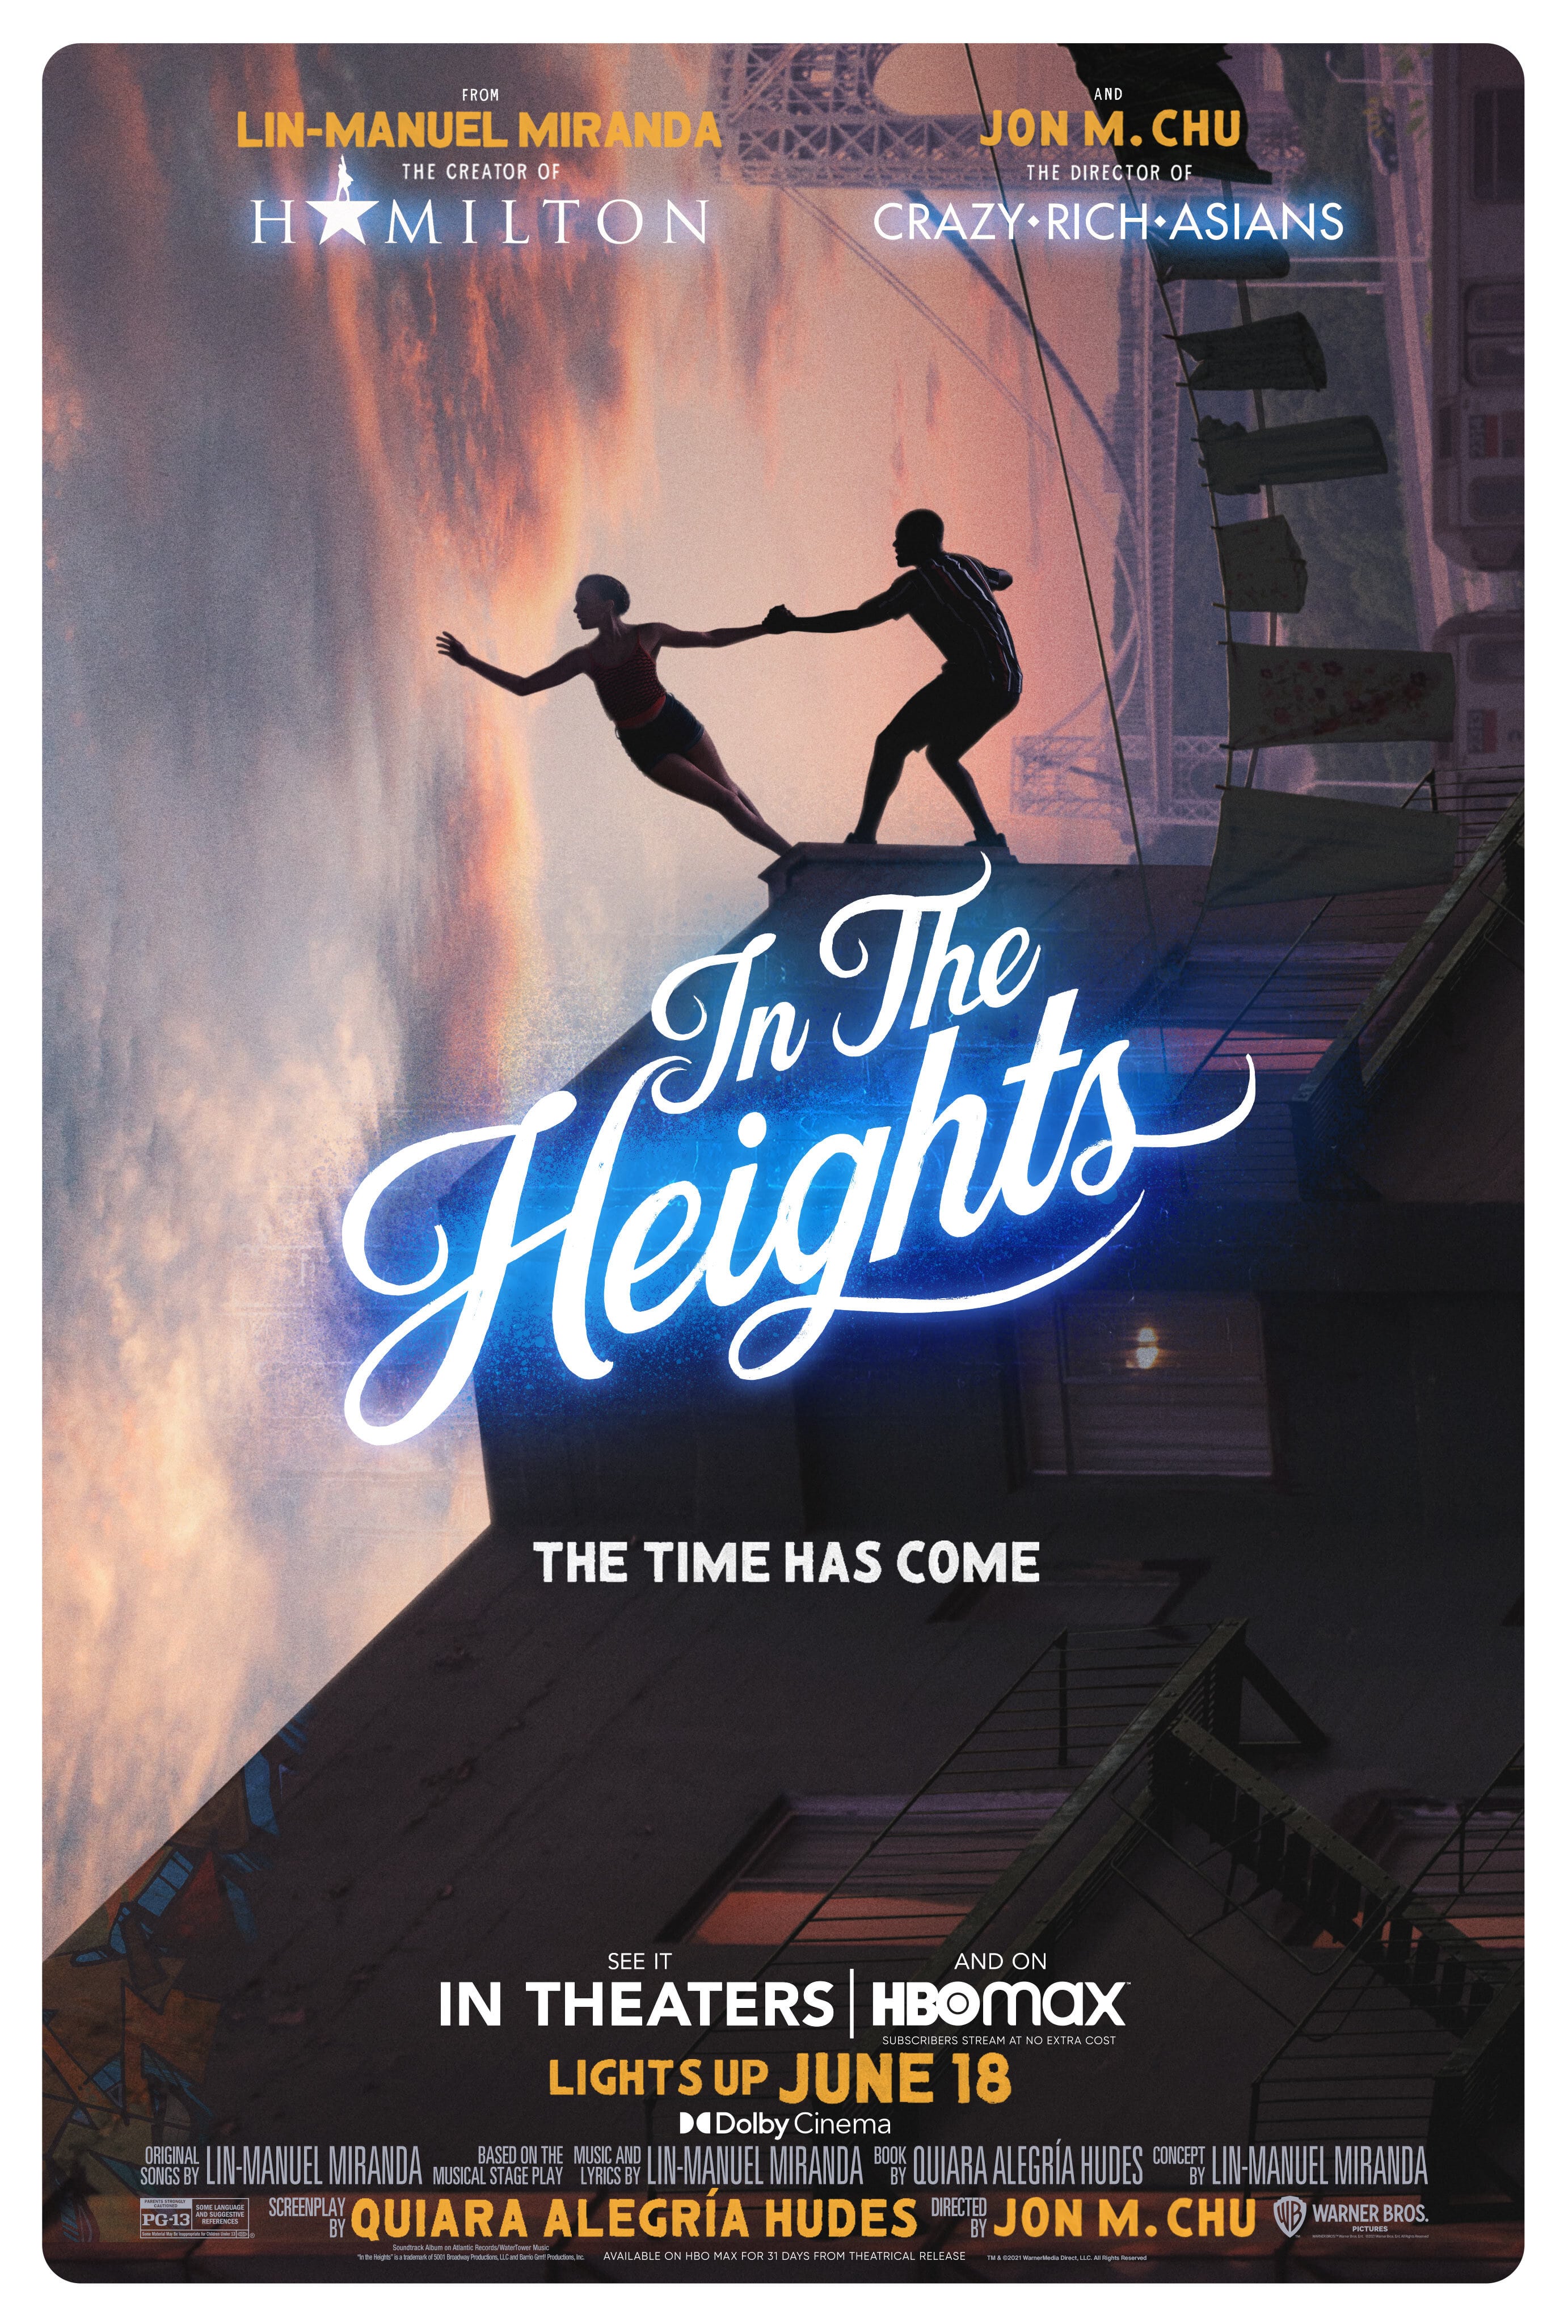 New In the Heights movie poster of a couple dancing on the side of a building.